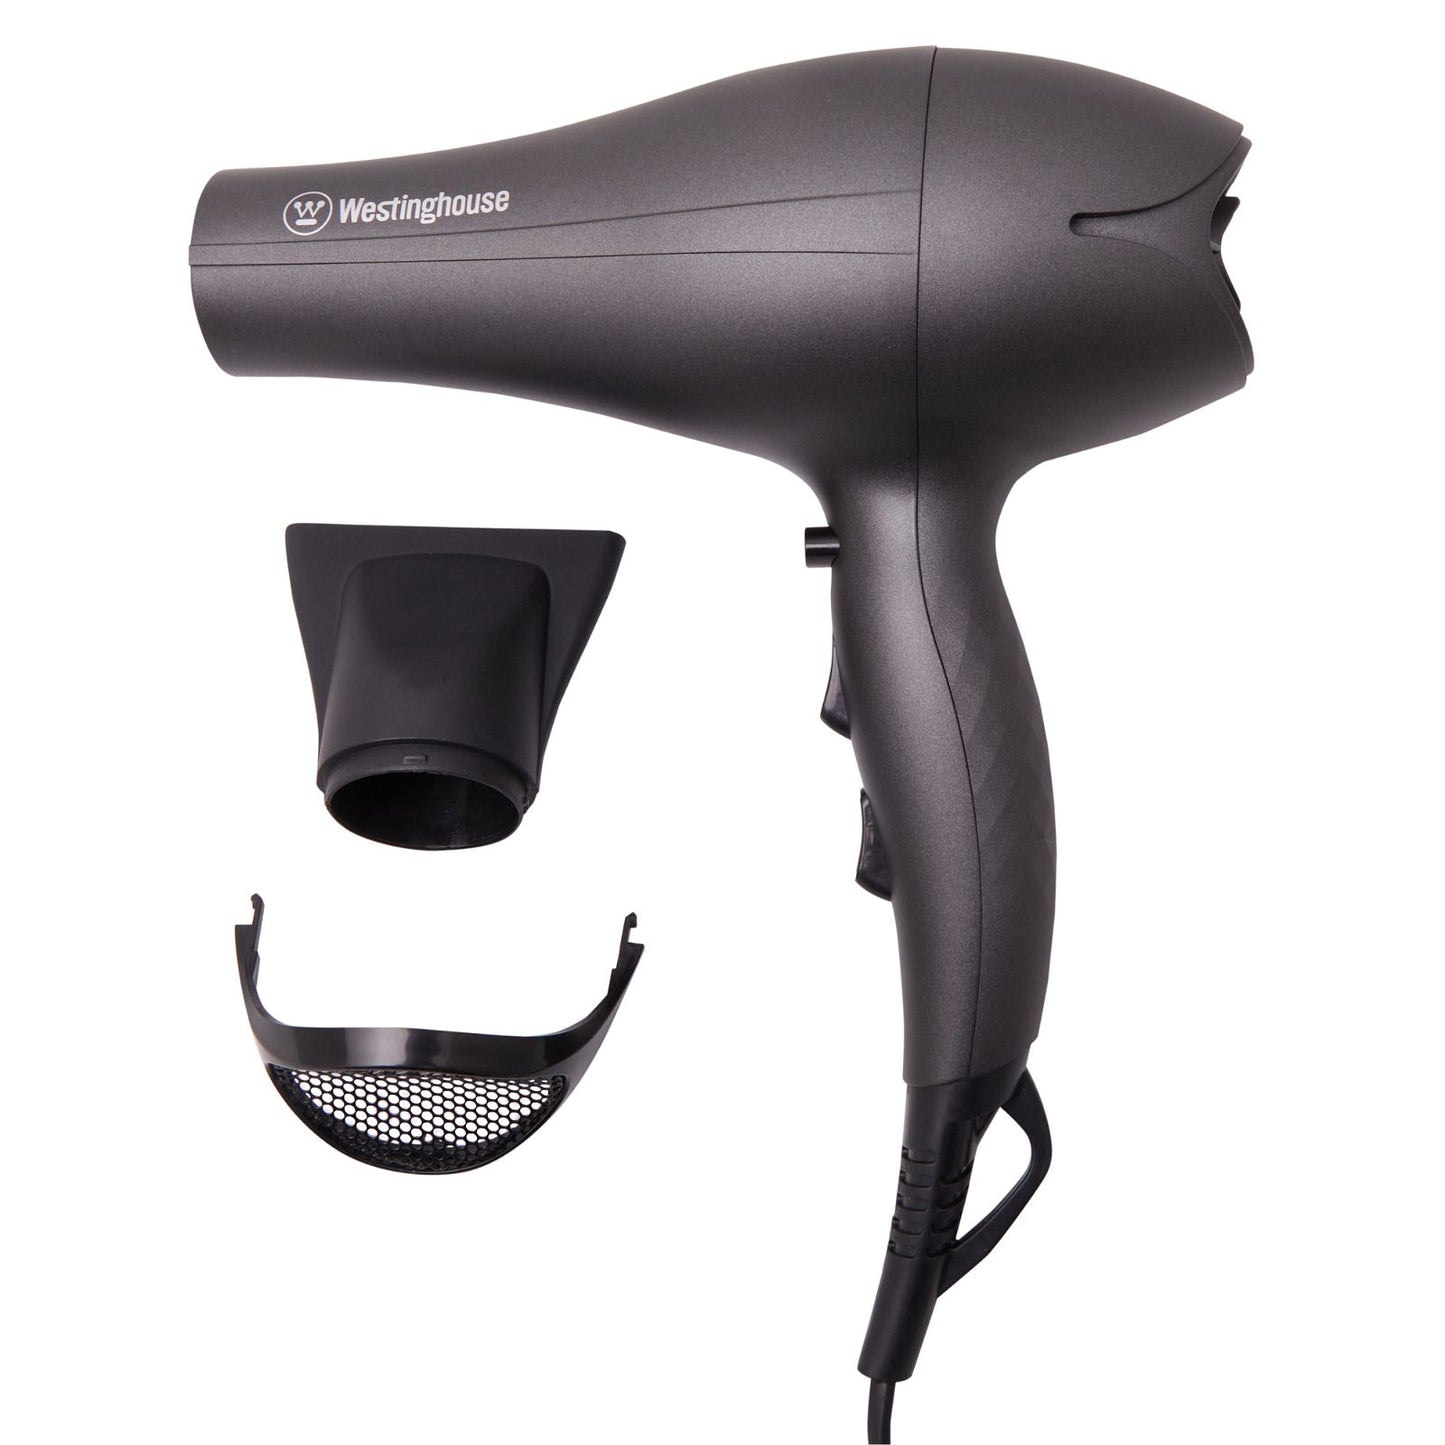 Westinghouse 2400W Ionic Anti-Frizz Hair Dryer with Cold Shot-#product_category#- Distributed by:  under license